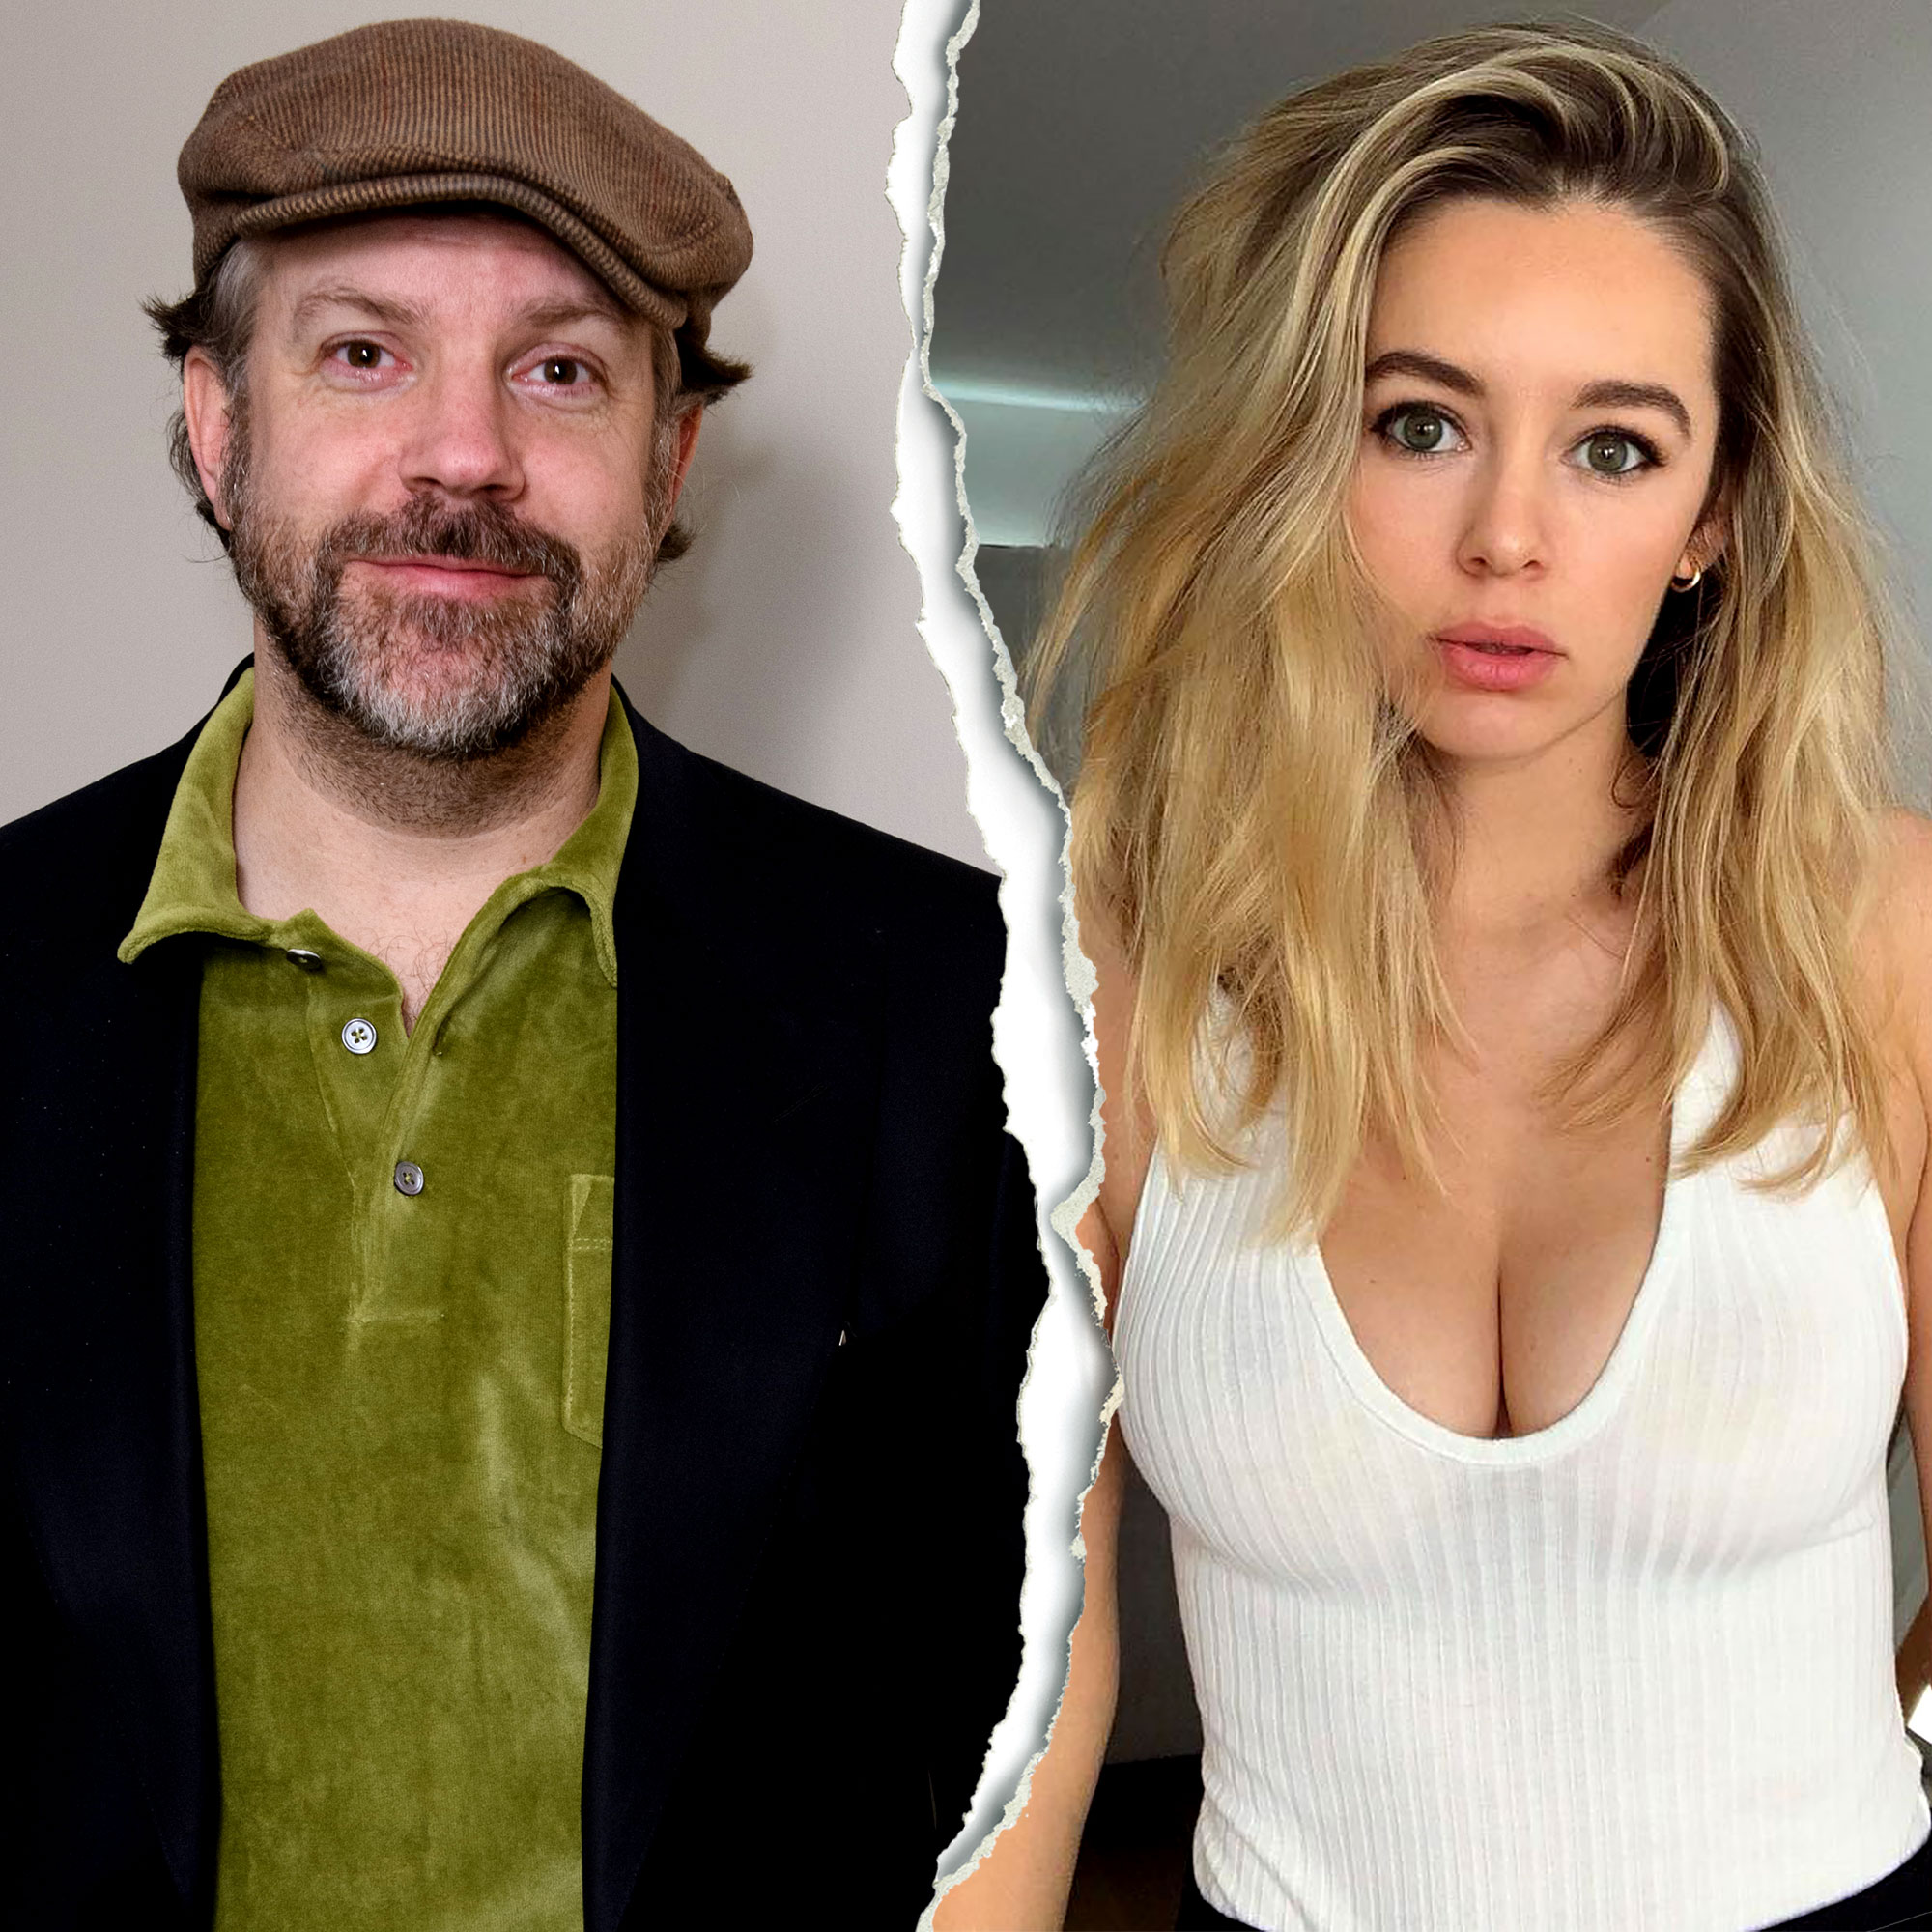 Jason Sudeikis, Keeley Hazell Split After Nearly 1 Year of Dating hq image